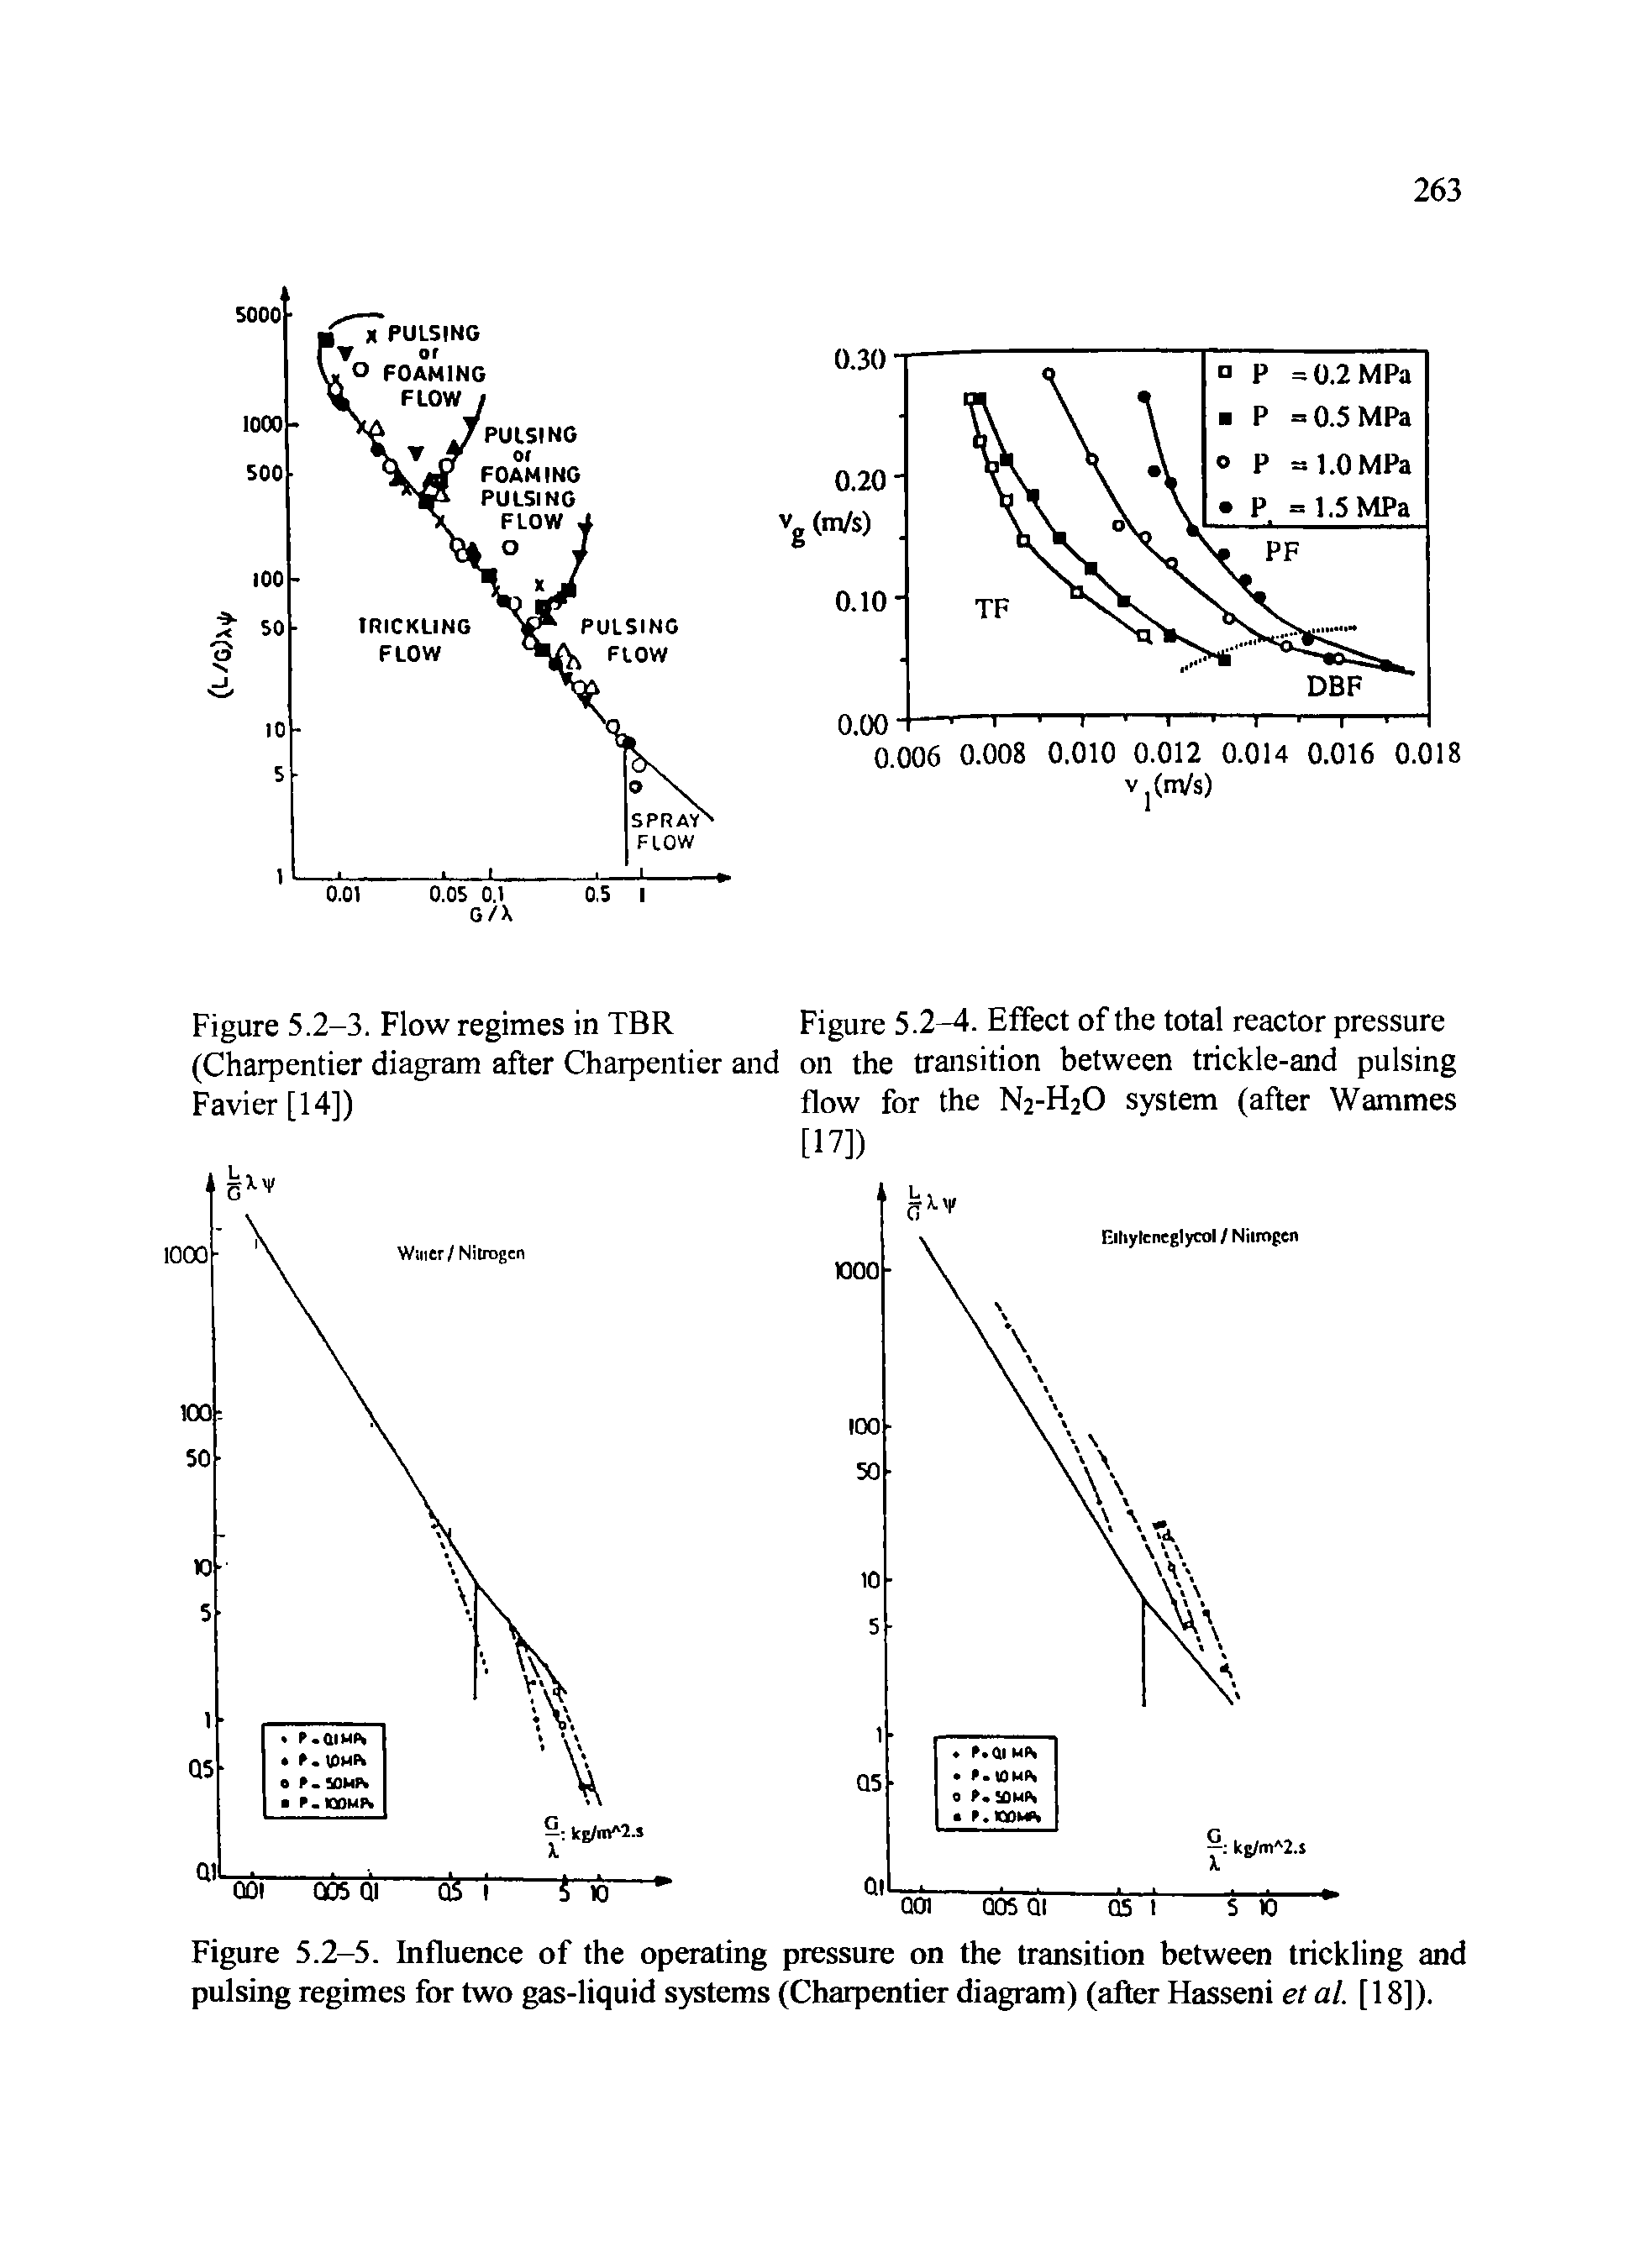 Figure 5.2-5. Influence of the operating pressure on the transition between trickling and pulsing regimes for two gas-liquid systems (Charpentier diagram) (after Flasseni et al. [18]).